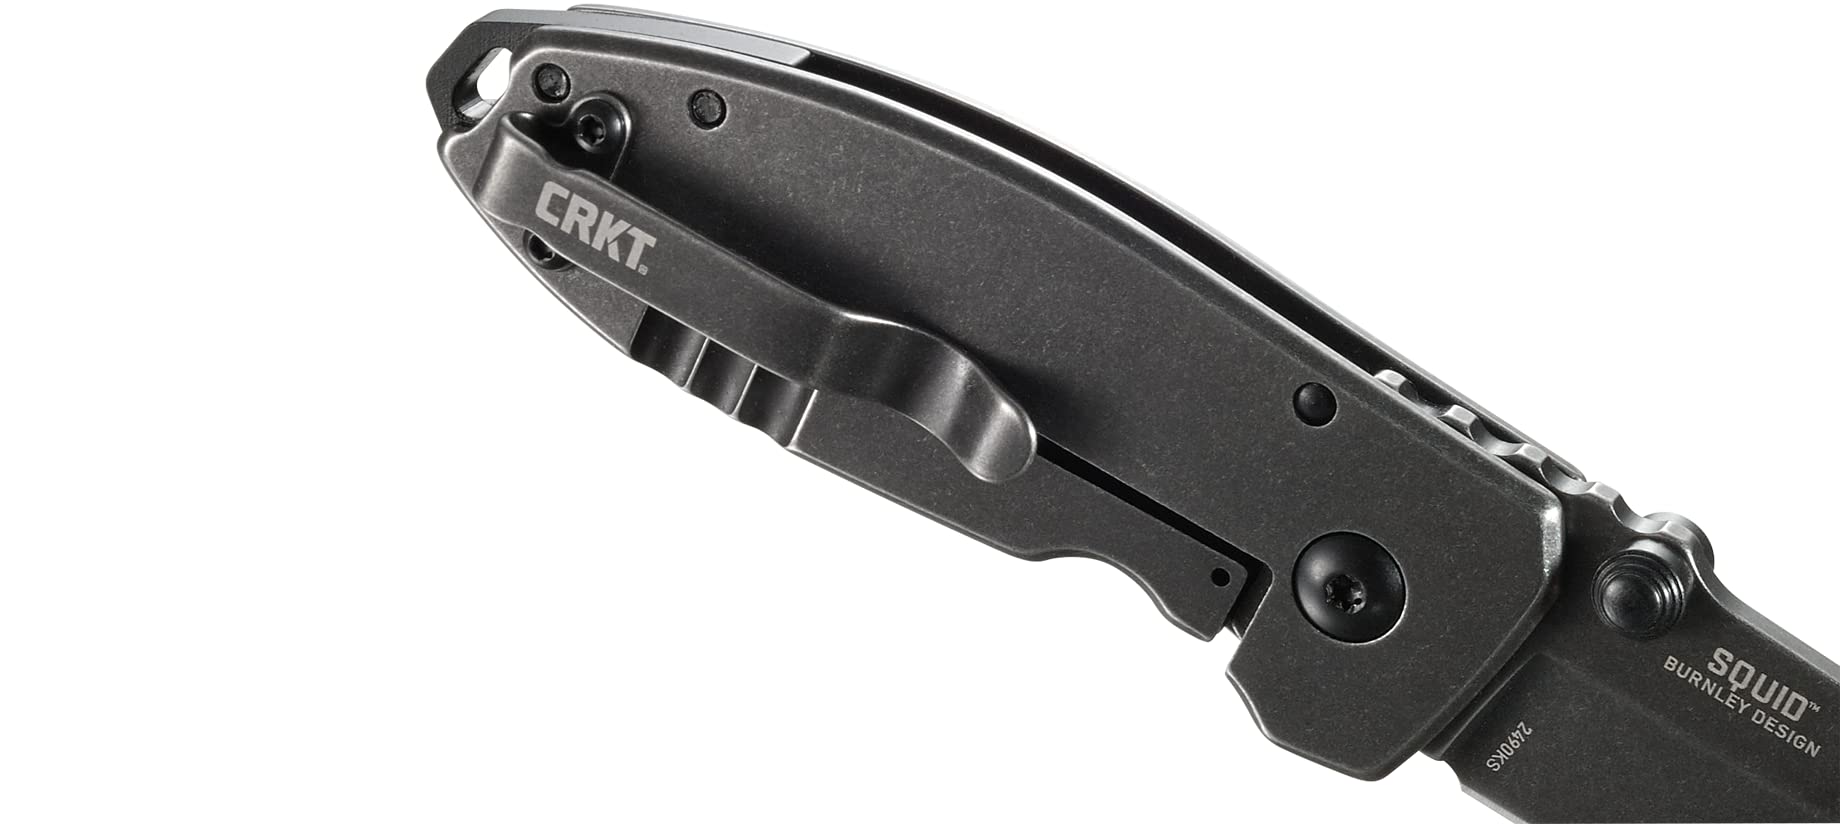 CRKT Squid Folding Pocket Knife: Compact EDC Straight Edge Utility Knife with Stainless Steel Blade and Framelock Handle